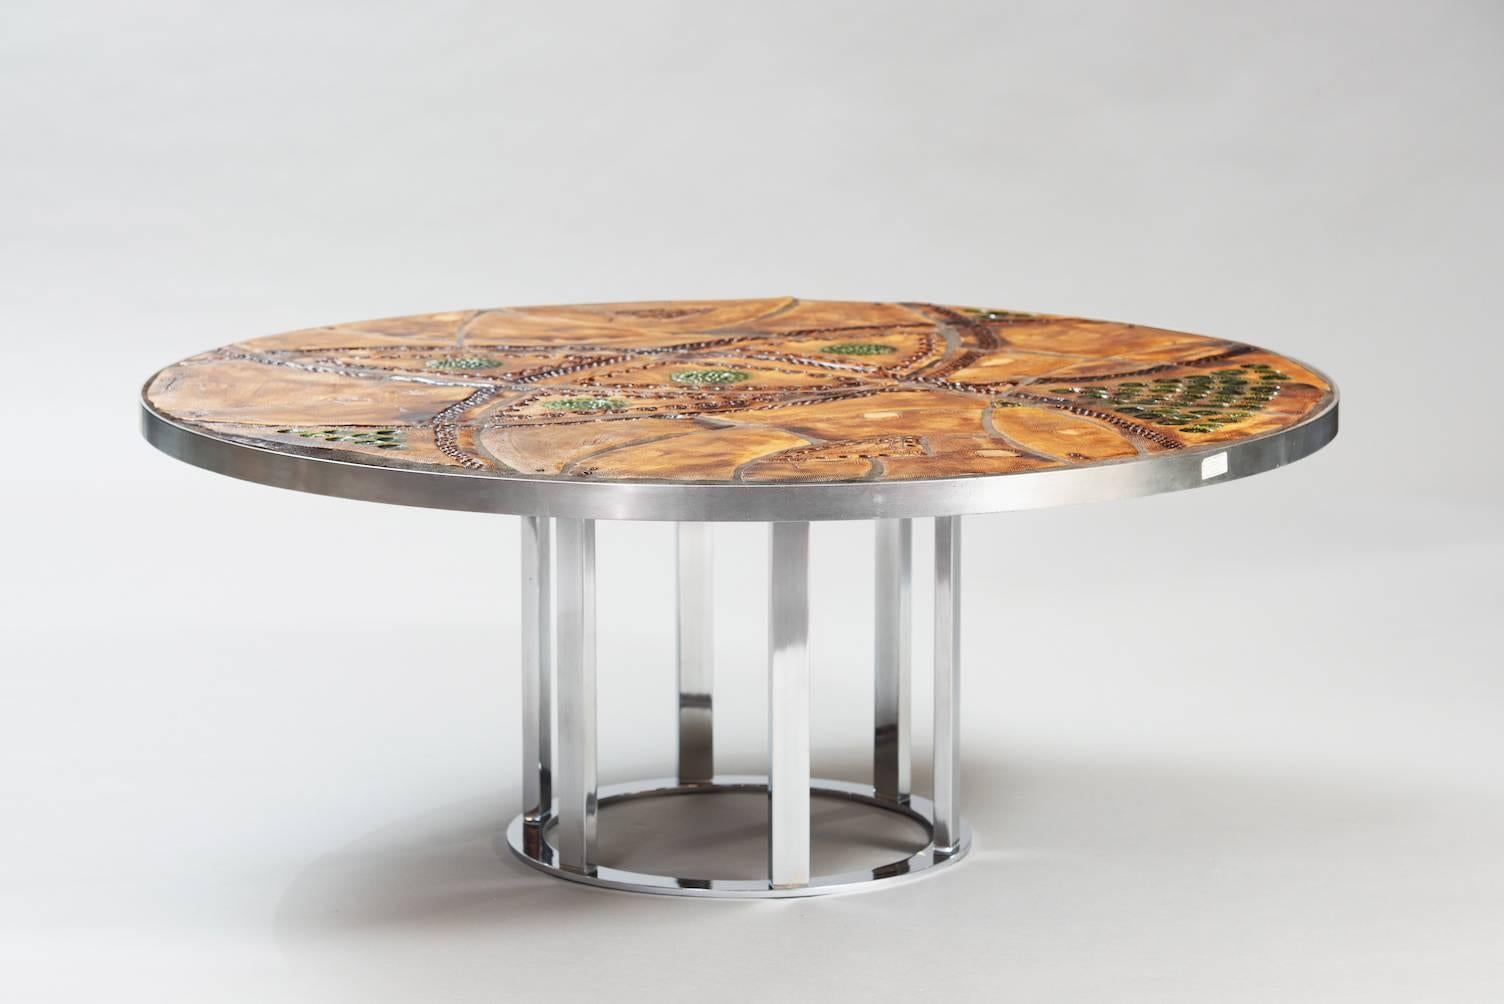 Circular coffee table with a steel frame and chrome base, glazed ceramic top.
Signed: Just Lichtenberg.